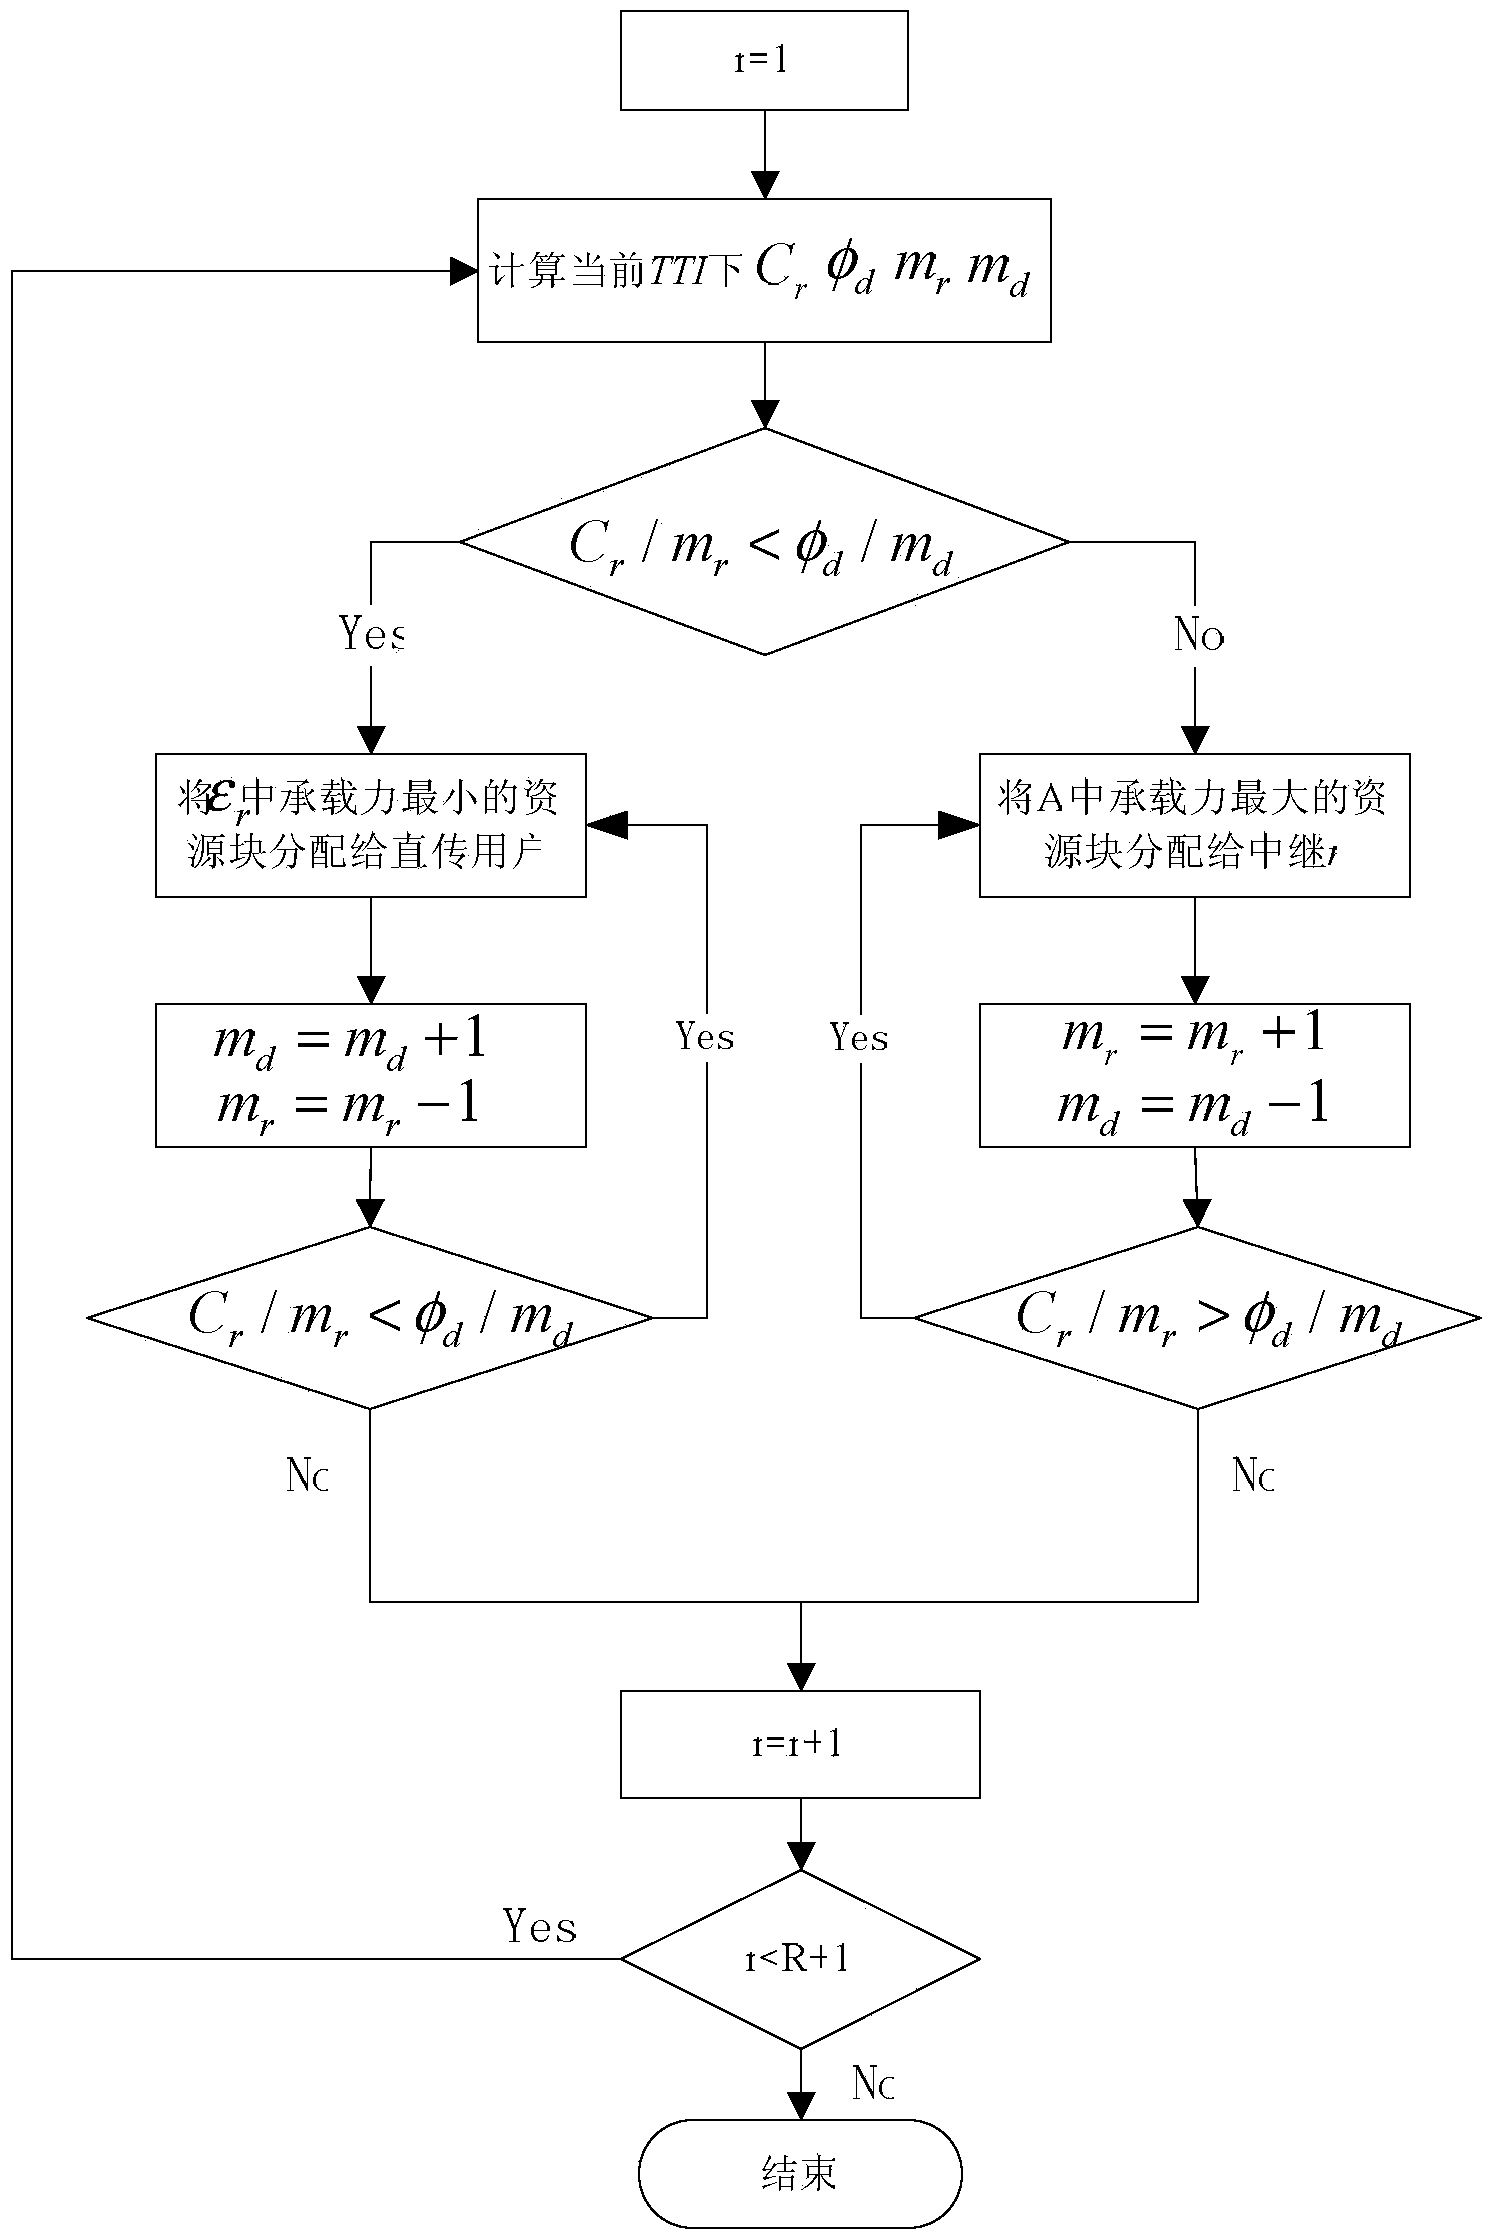 Upstream resource distribution method capable of considering both throughput capacity and fairness in TD-LTE-Advanced (Time Division-Long Term Evolution-Advanced) relay system